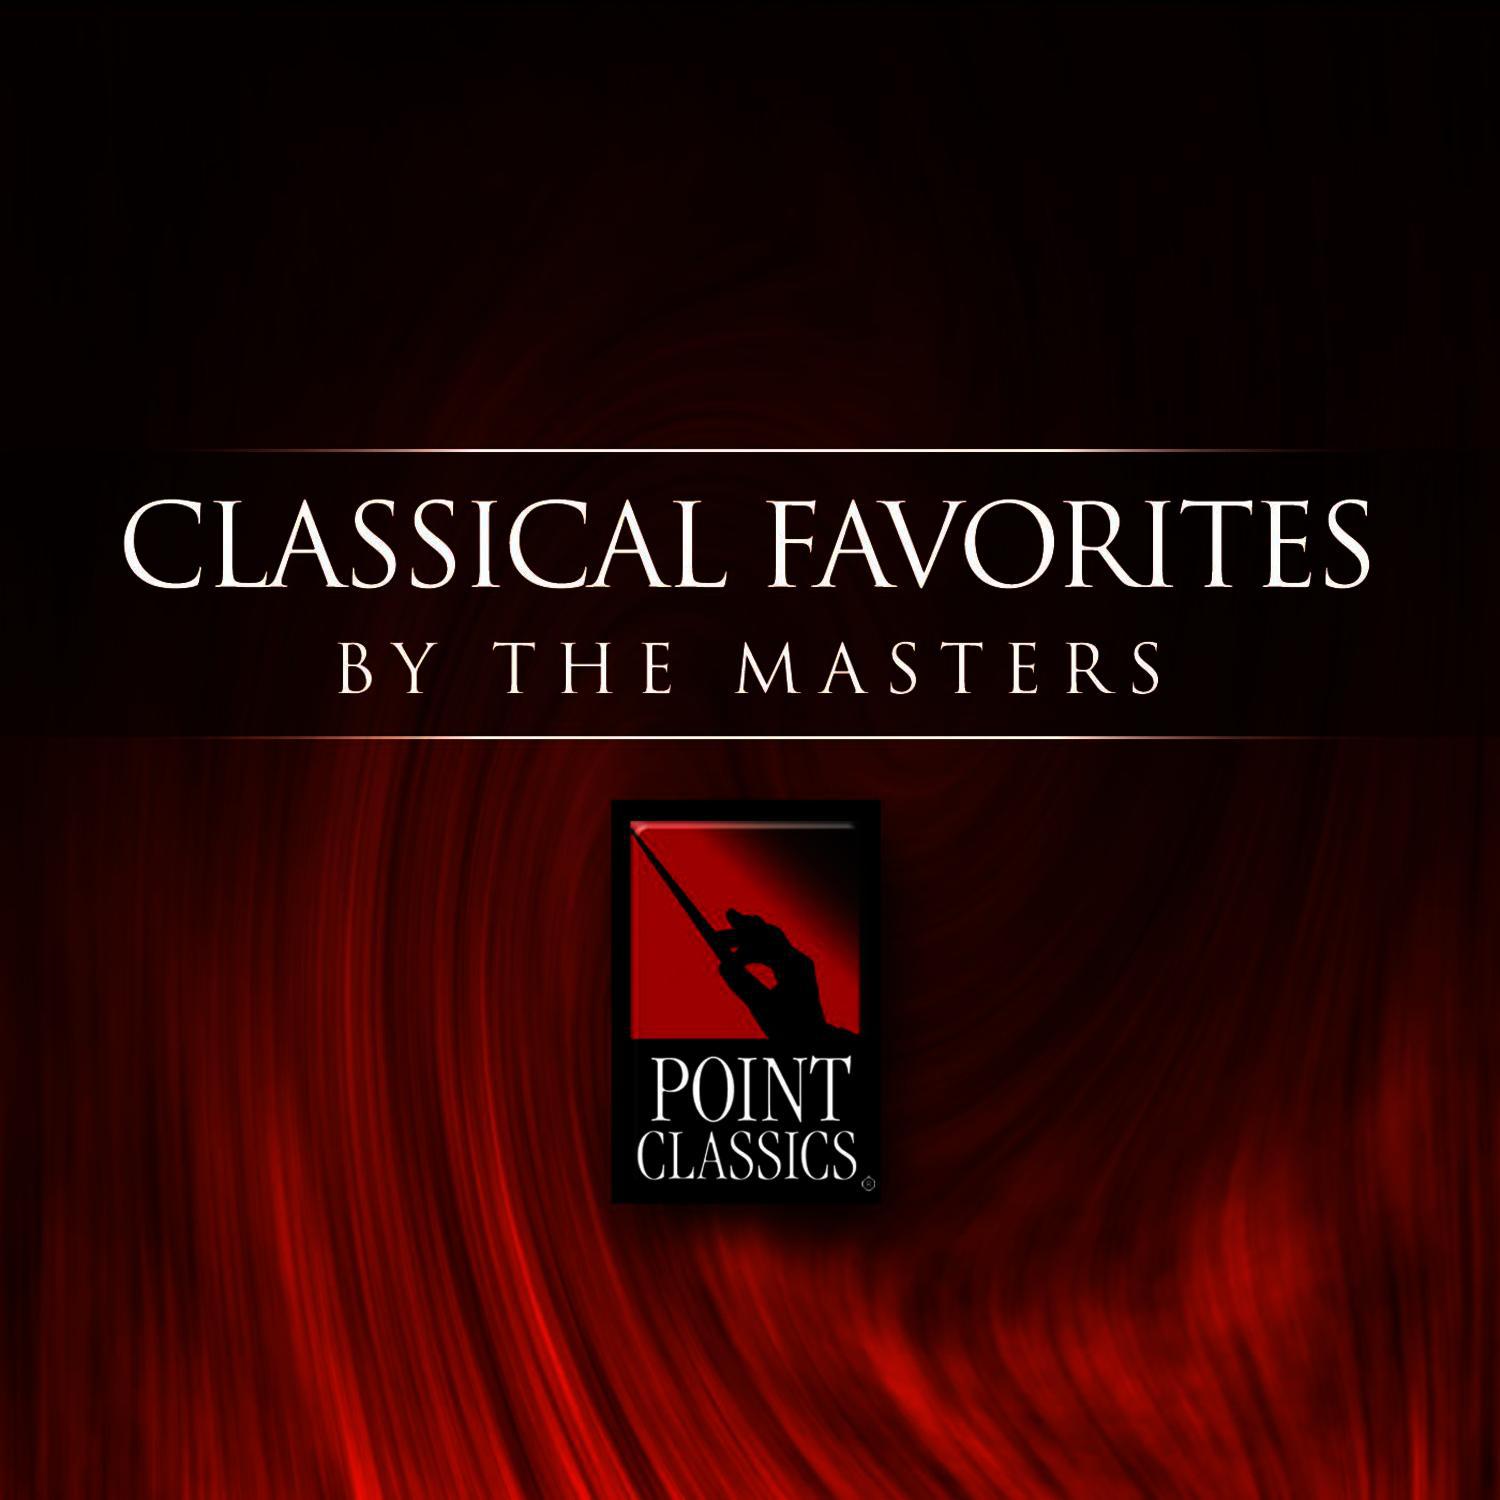 Best of the Classical Period